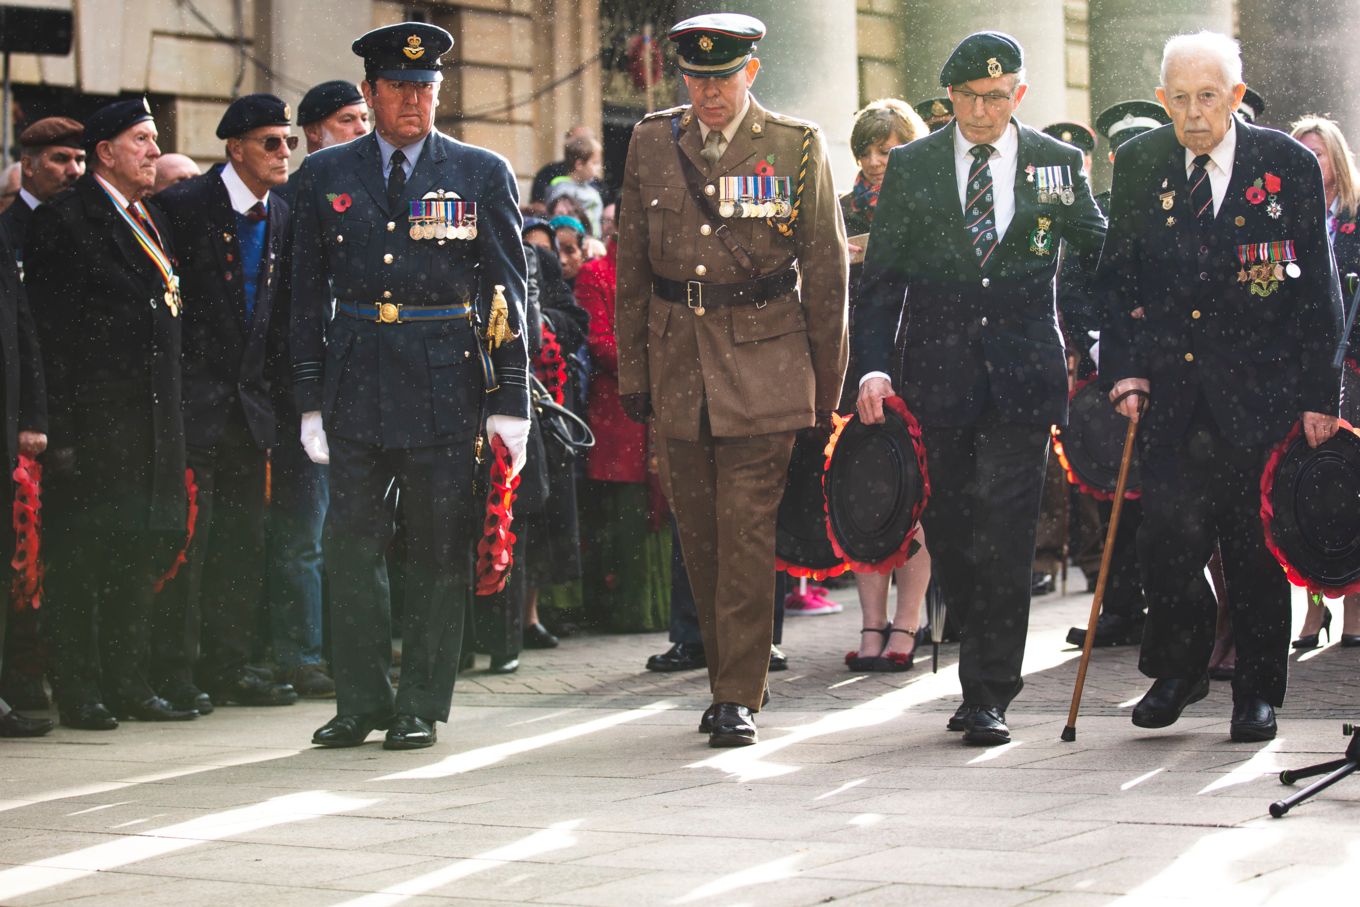 Wing Commander Nick Maxey (far left) was the official RAF representative at the commemorations in Peterborough.